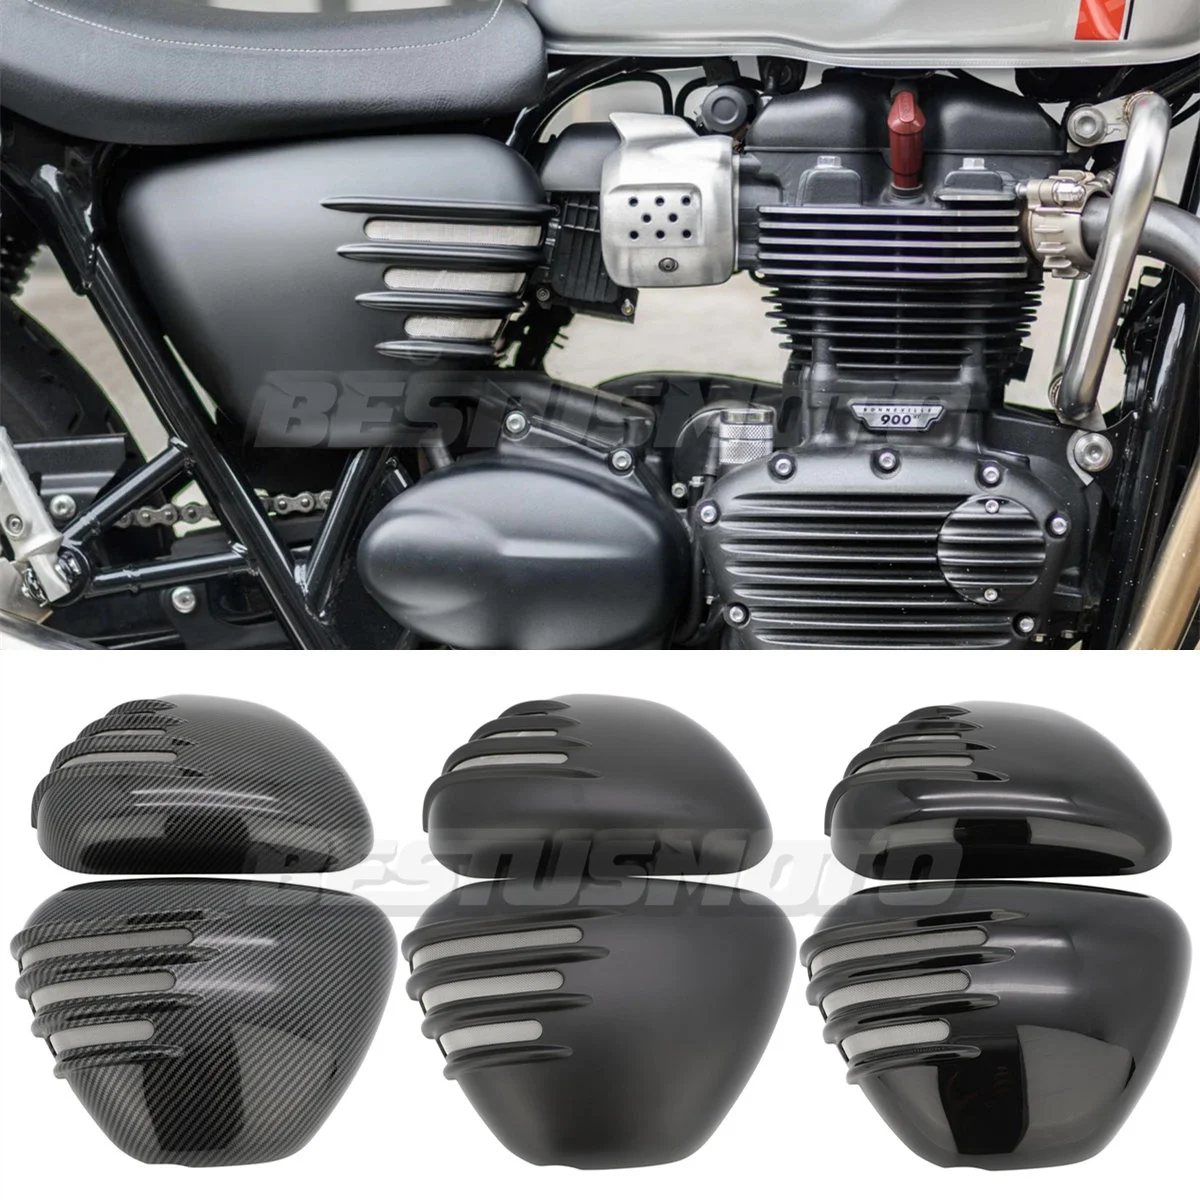 Motorcycle ABS Plastic Side Fairing Battery Cover For Triumph Street Twin Cup Scrambler 2017 2018 2019 2020 2021 2022